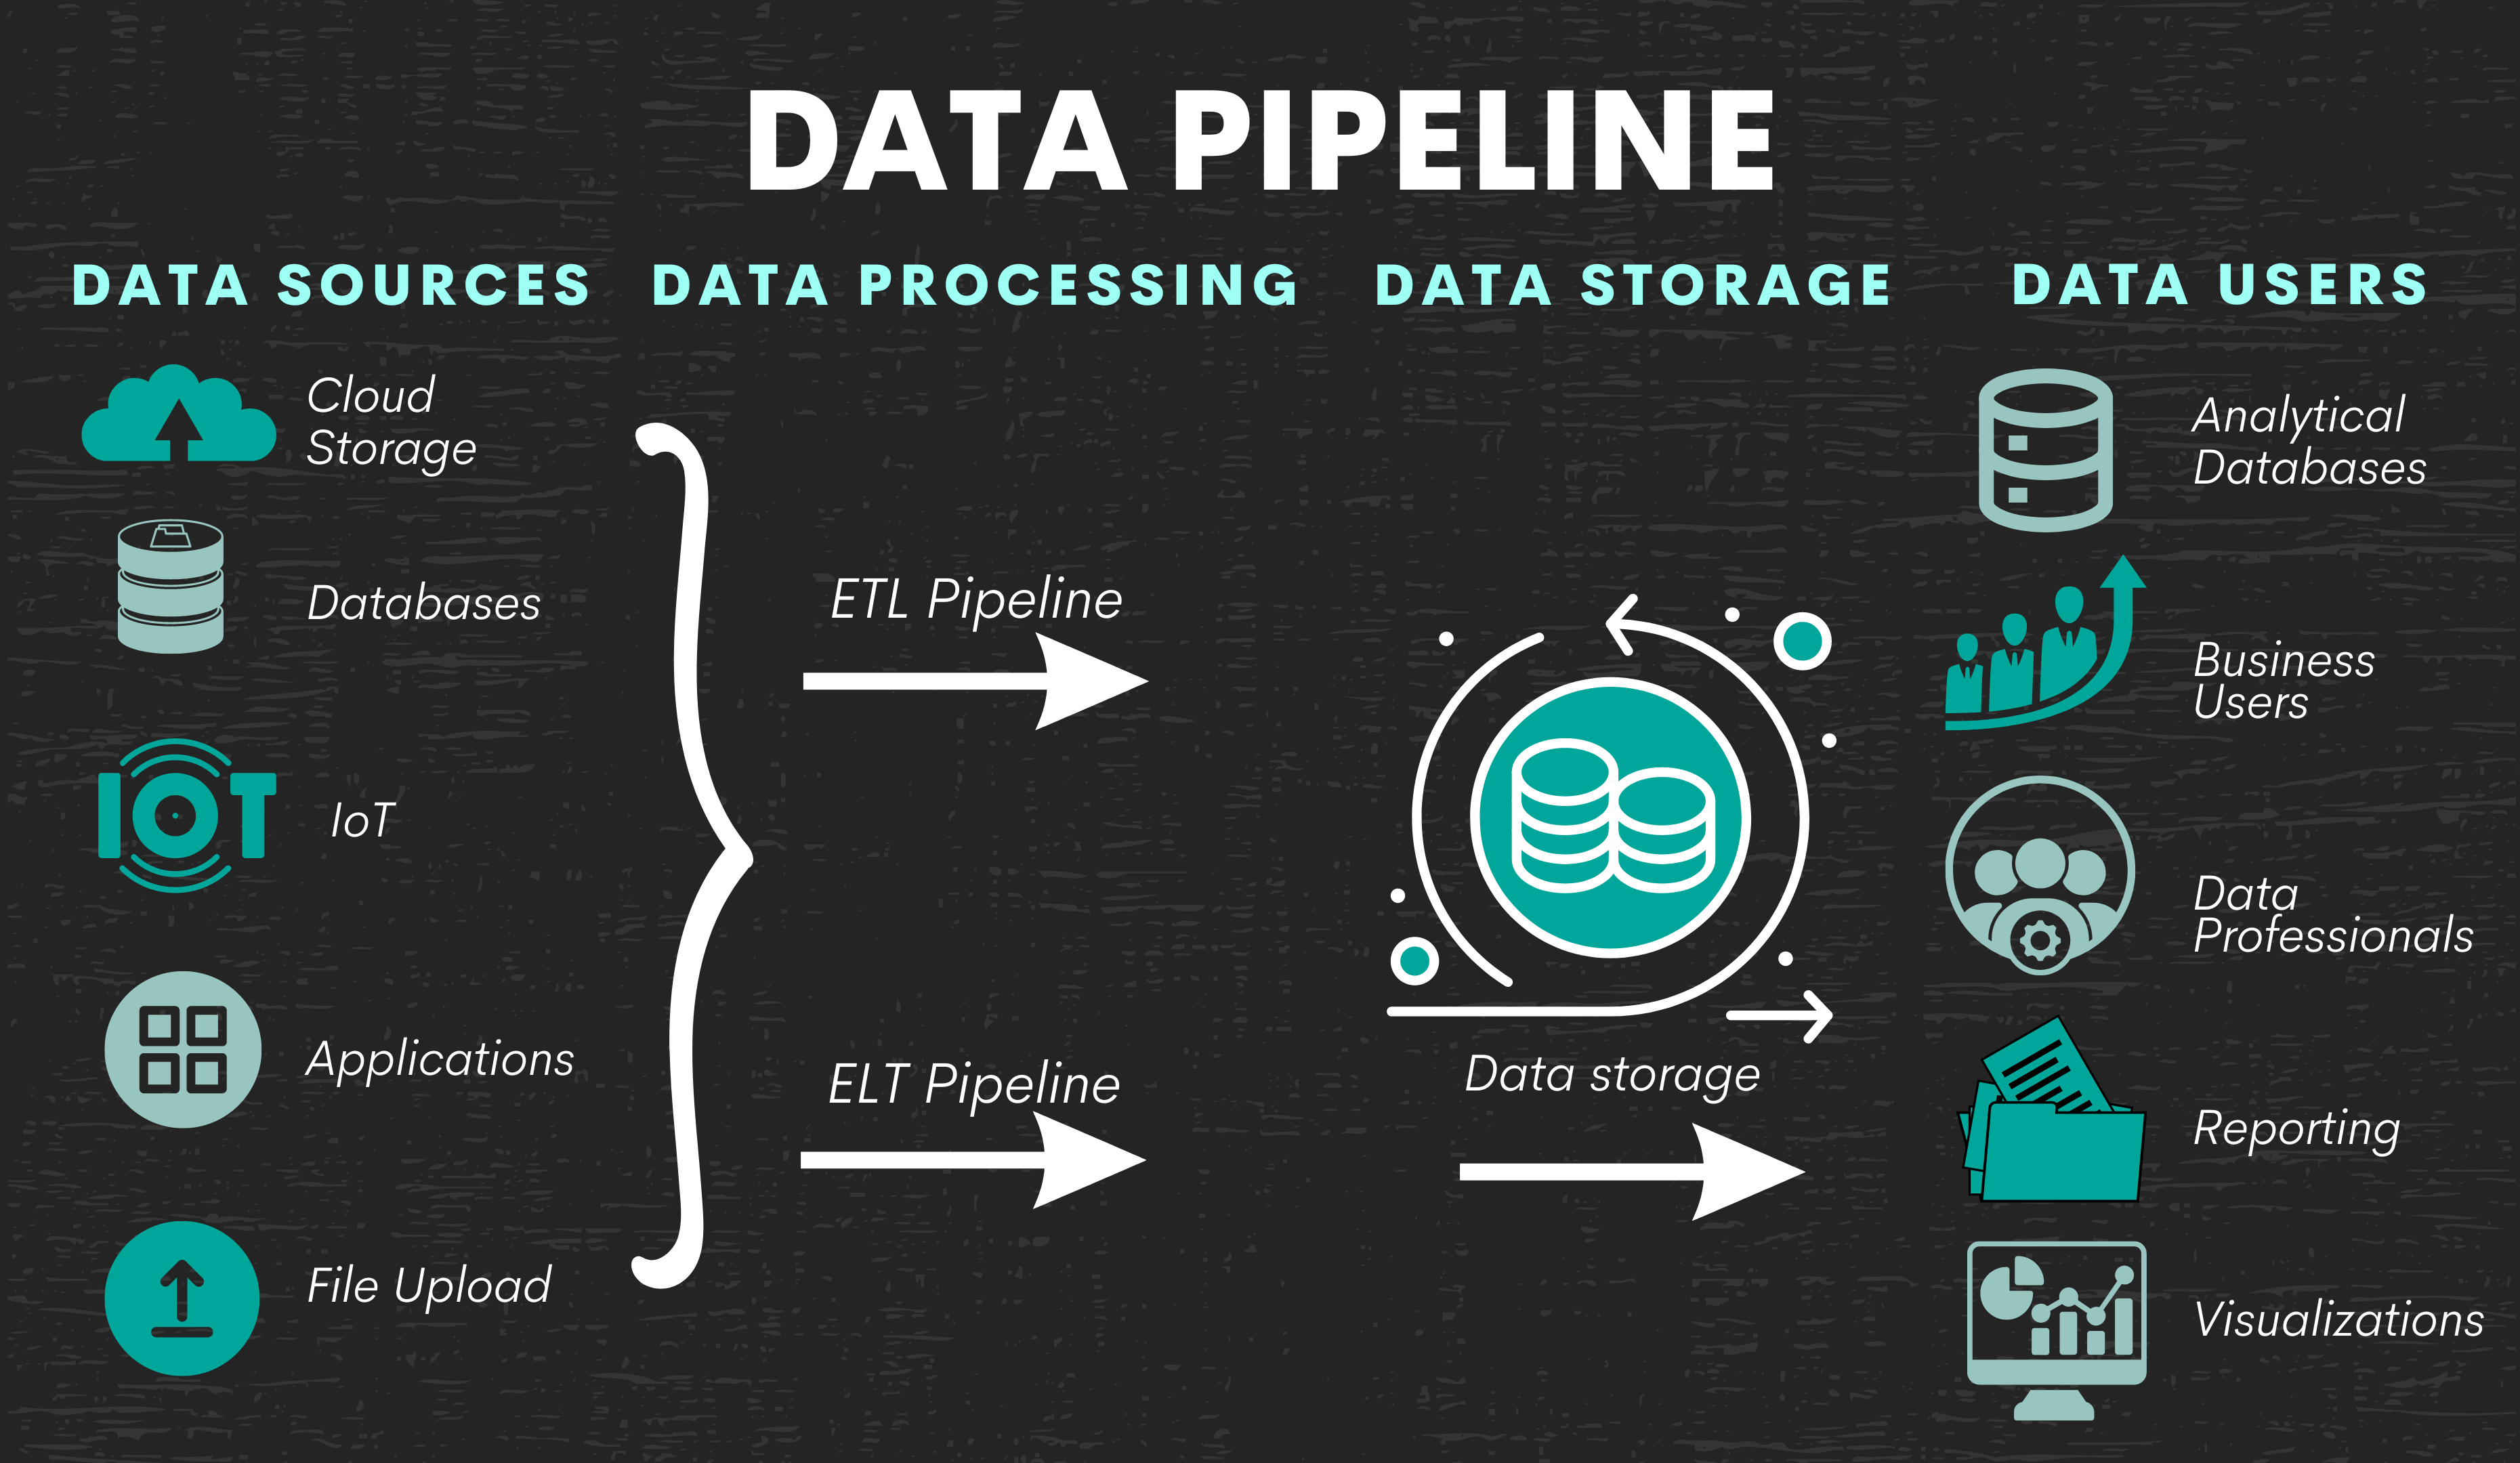 A data pipeline to understand what does a data engineer do